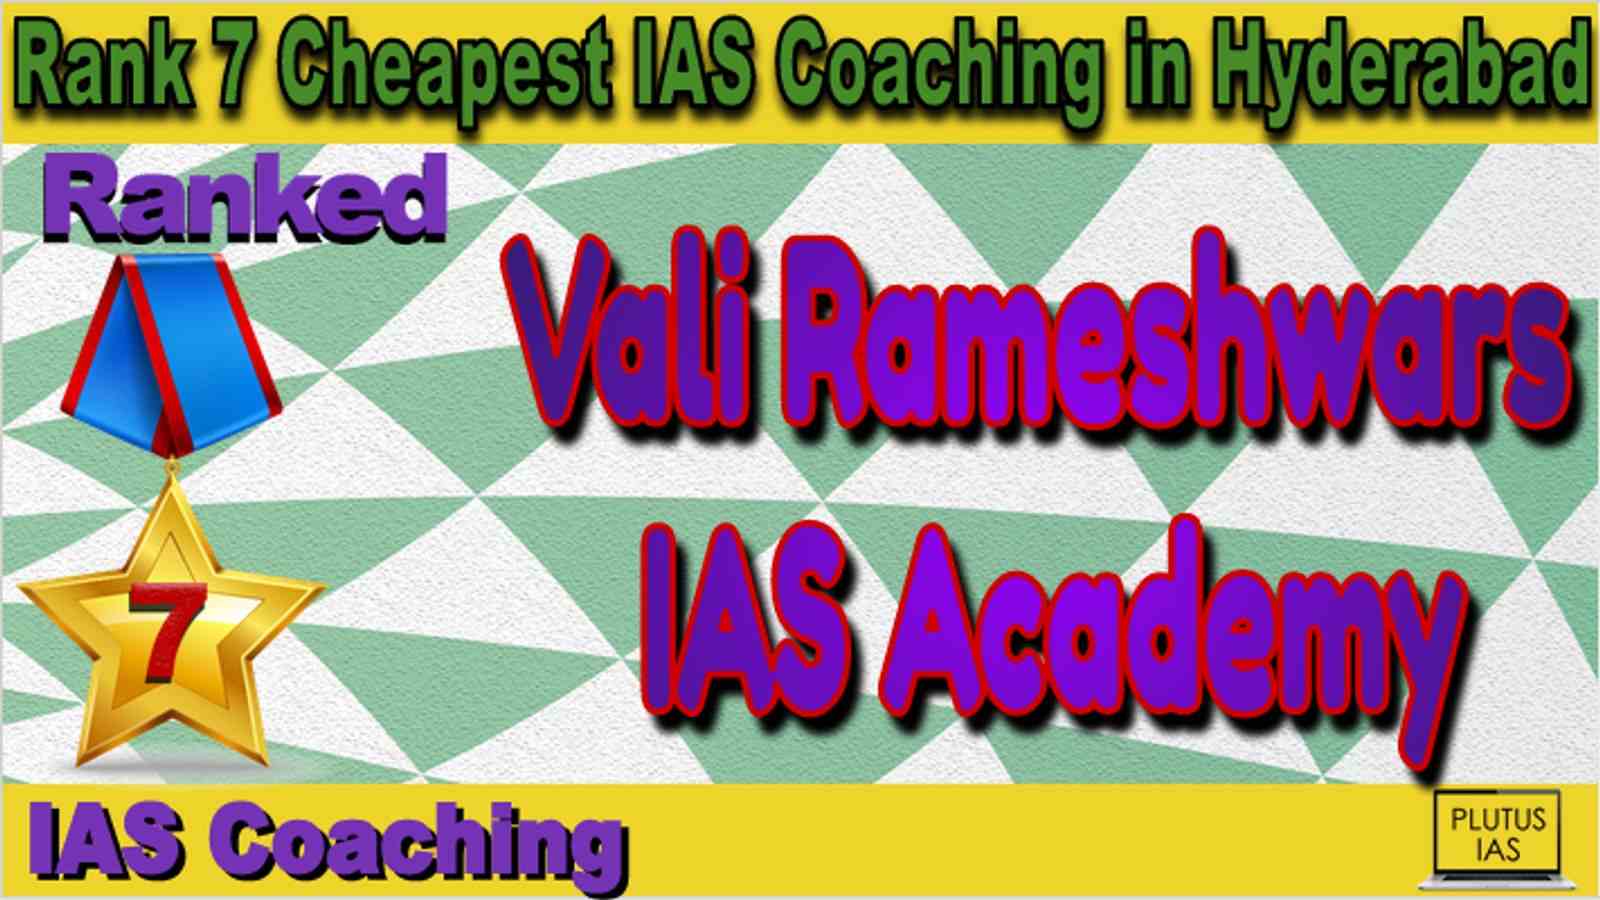 Rank 7 Cheapest IAS Coaching in Hyderabad